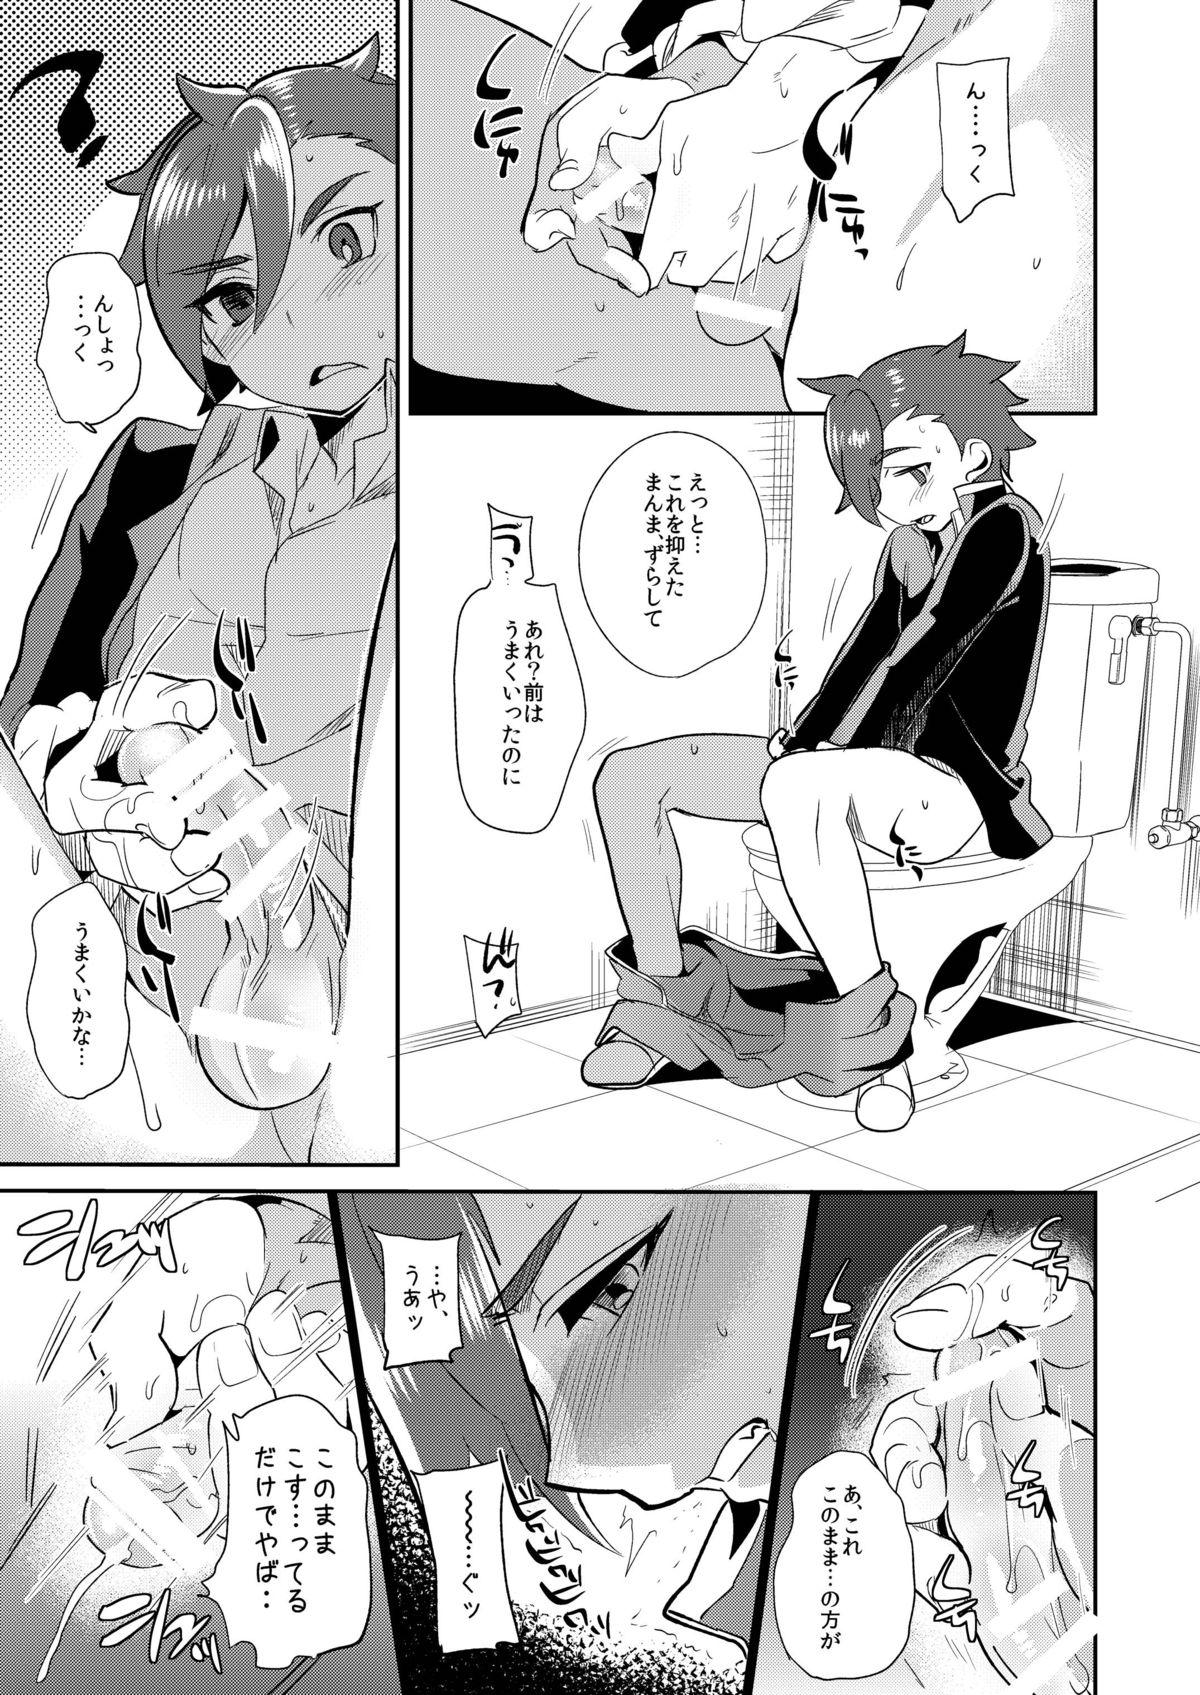 Stripping Onasekai + Omake - Gundam build fighters try Rabo - Page 5